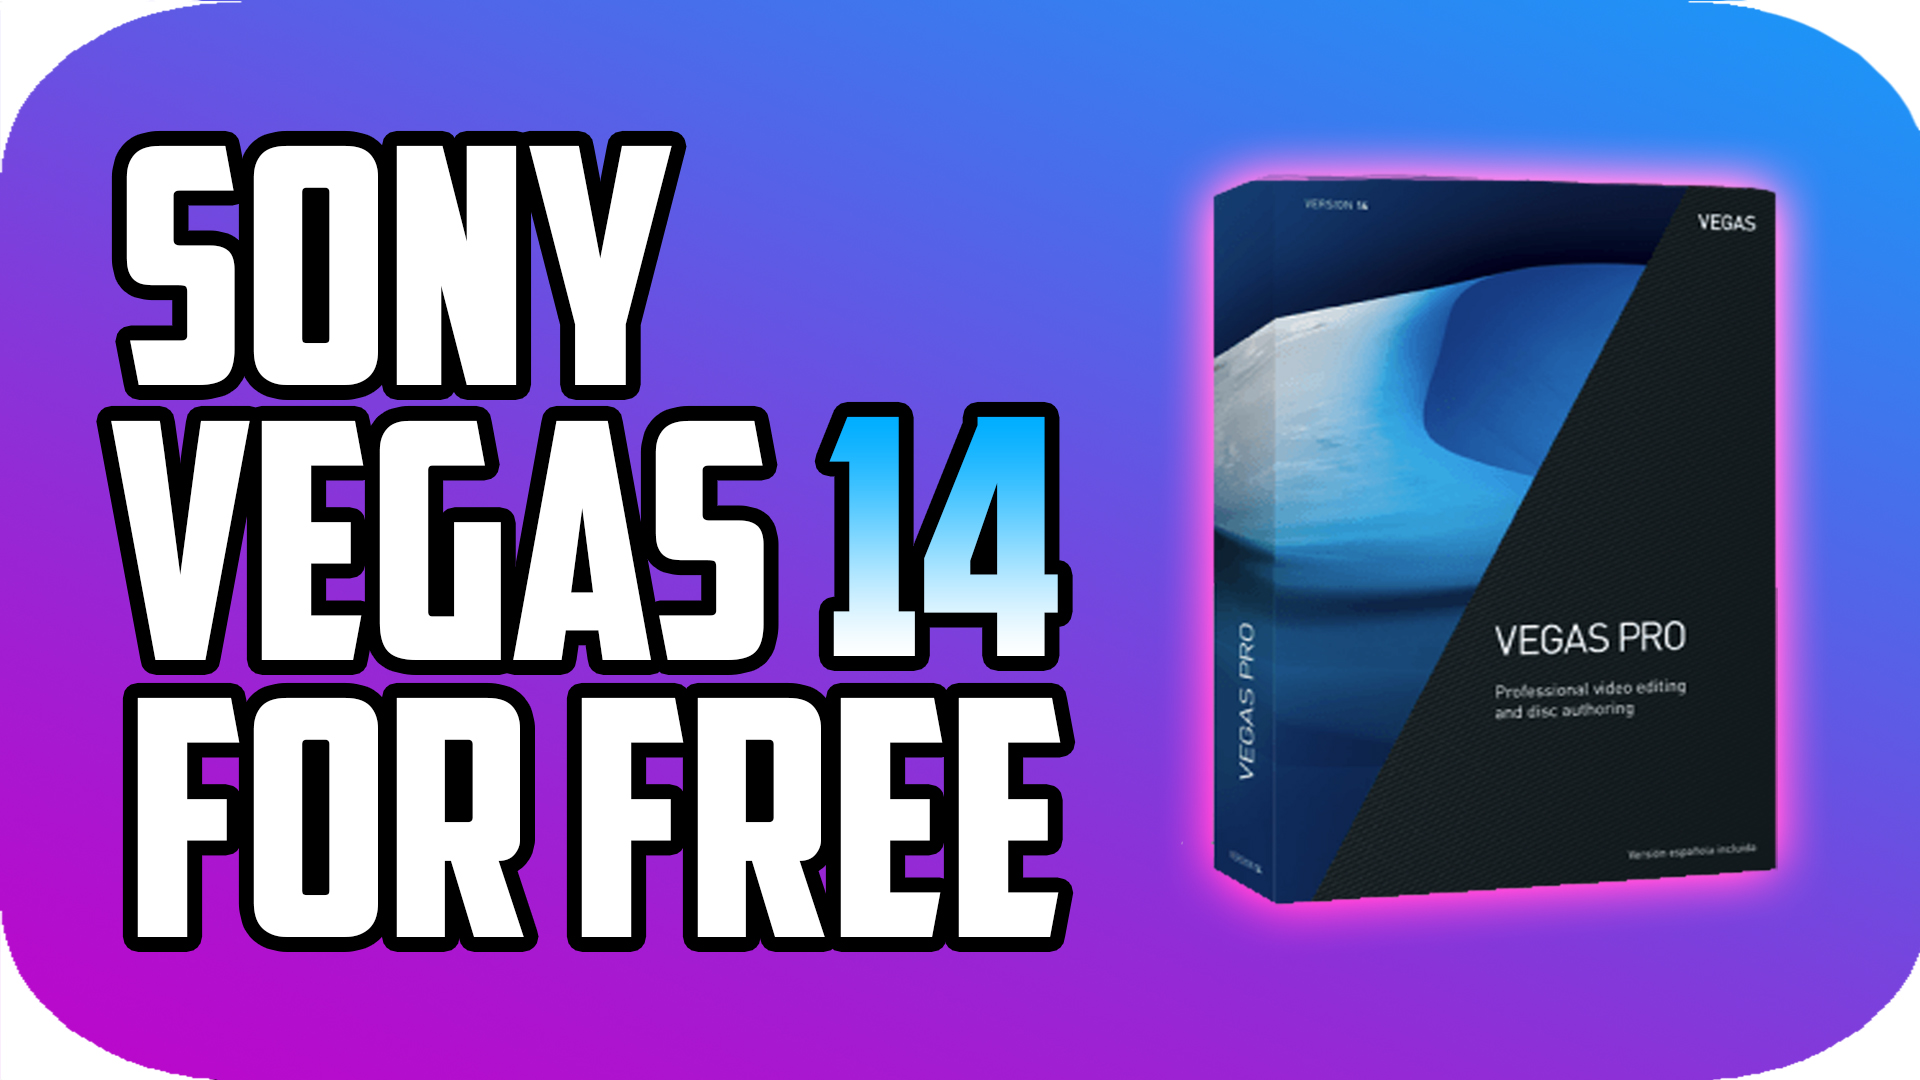 Sony Vegas Pro 14 Free Download Crohasit Download Pc Games For Free